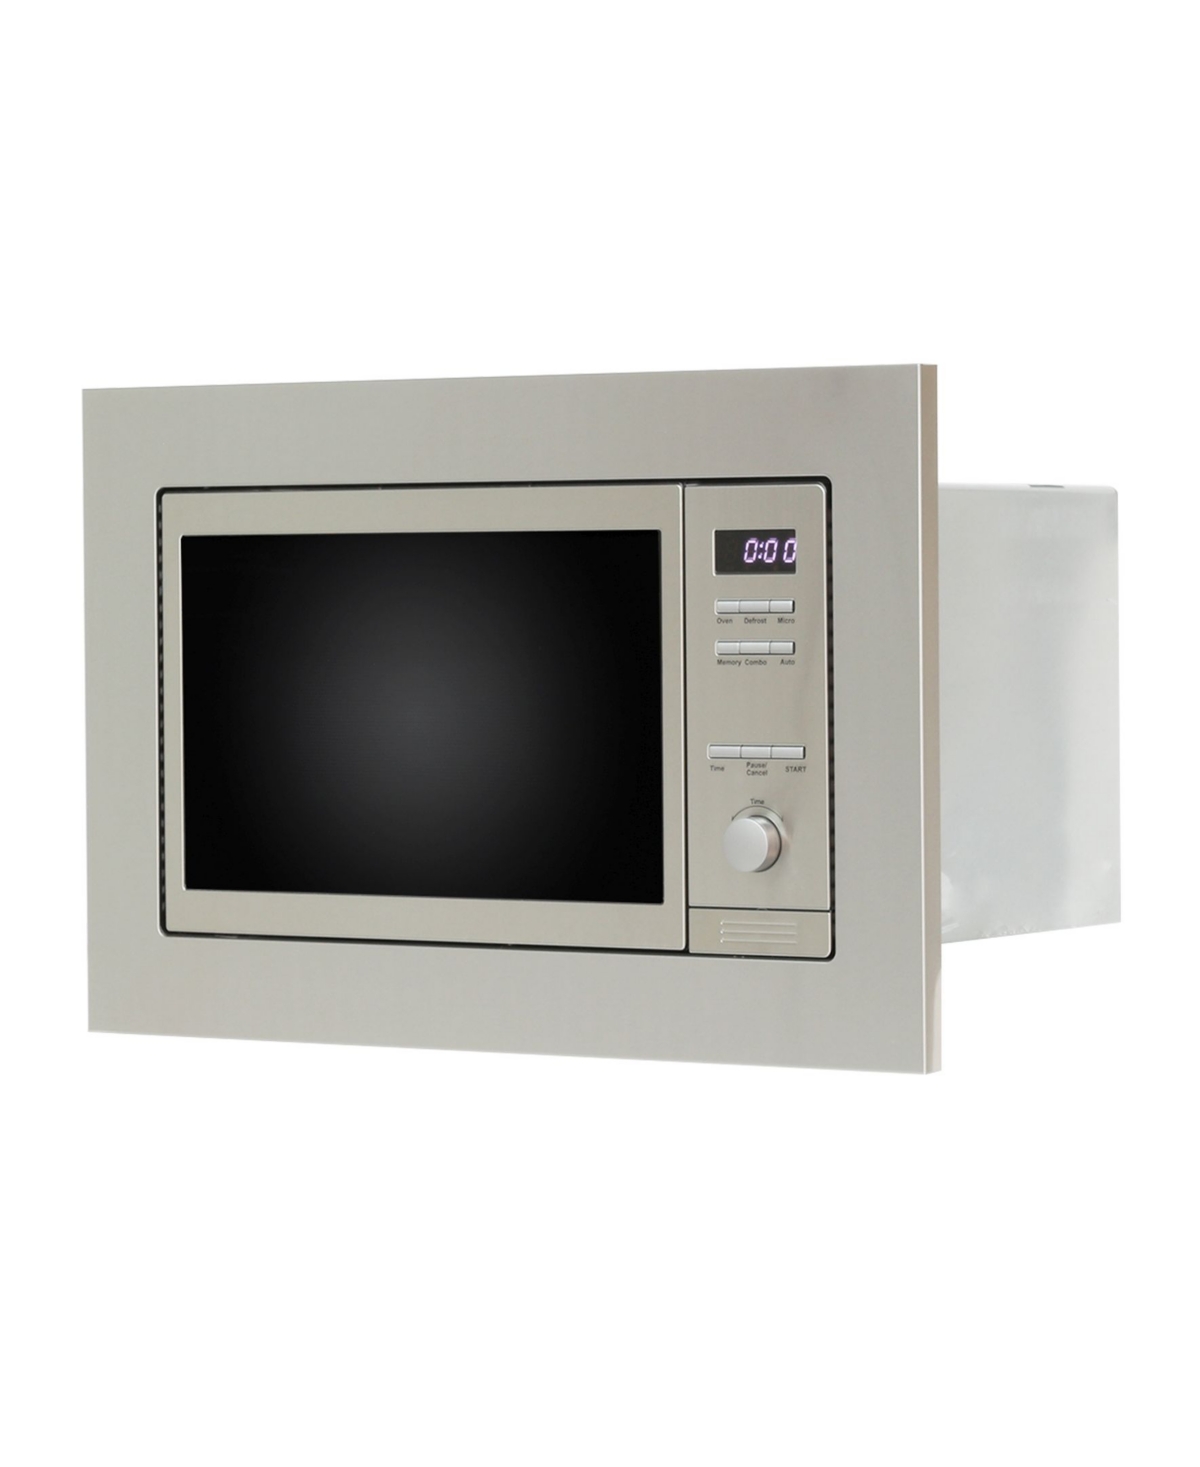 UPC 747037198019 product image for Equator 0.8 Cubic Feet Built-in Combo Microwave Oven with Auto Cook and Memory F | upcitemdb.com